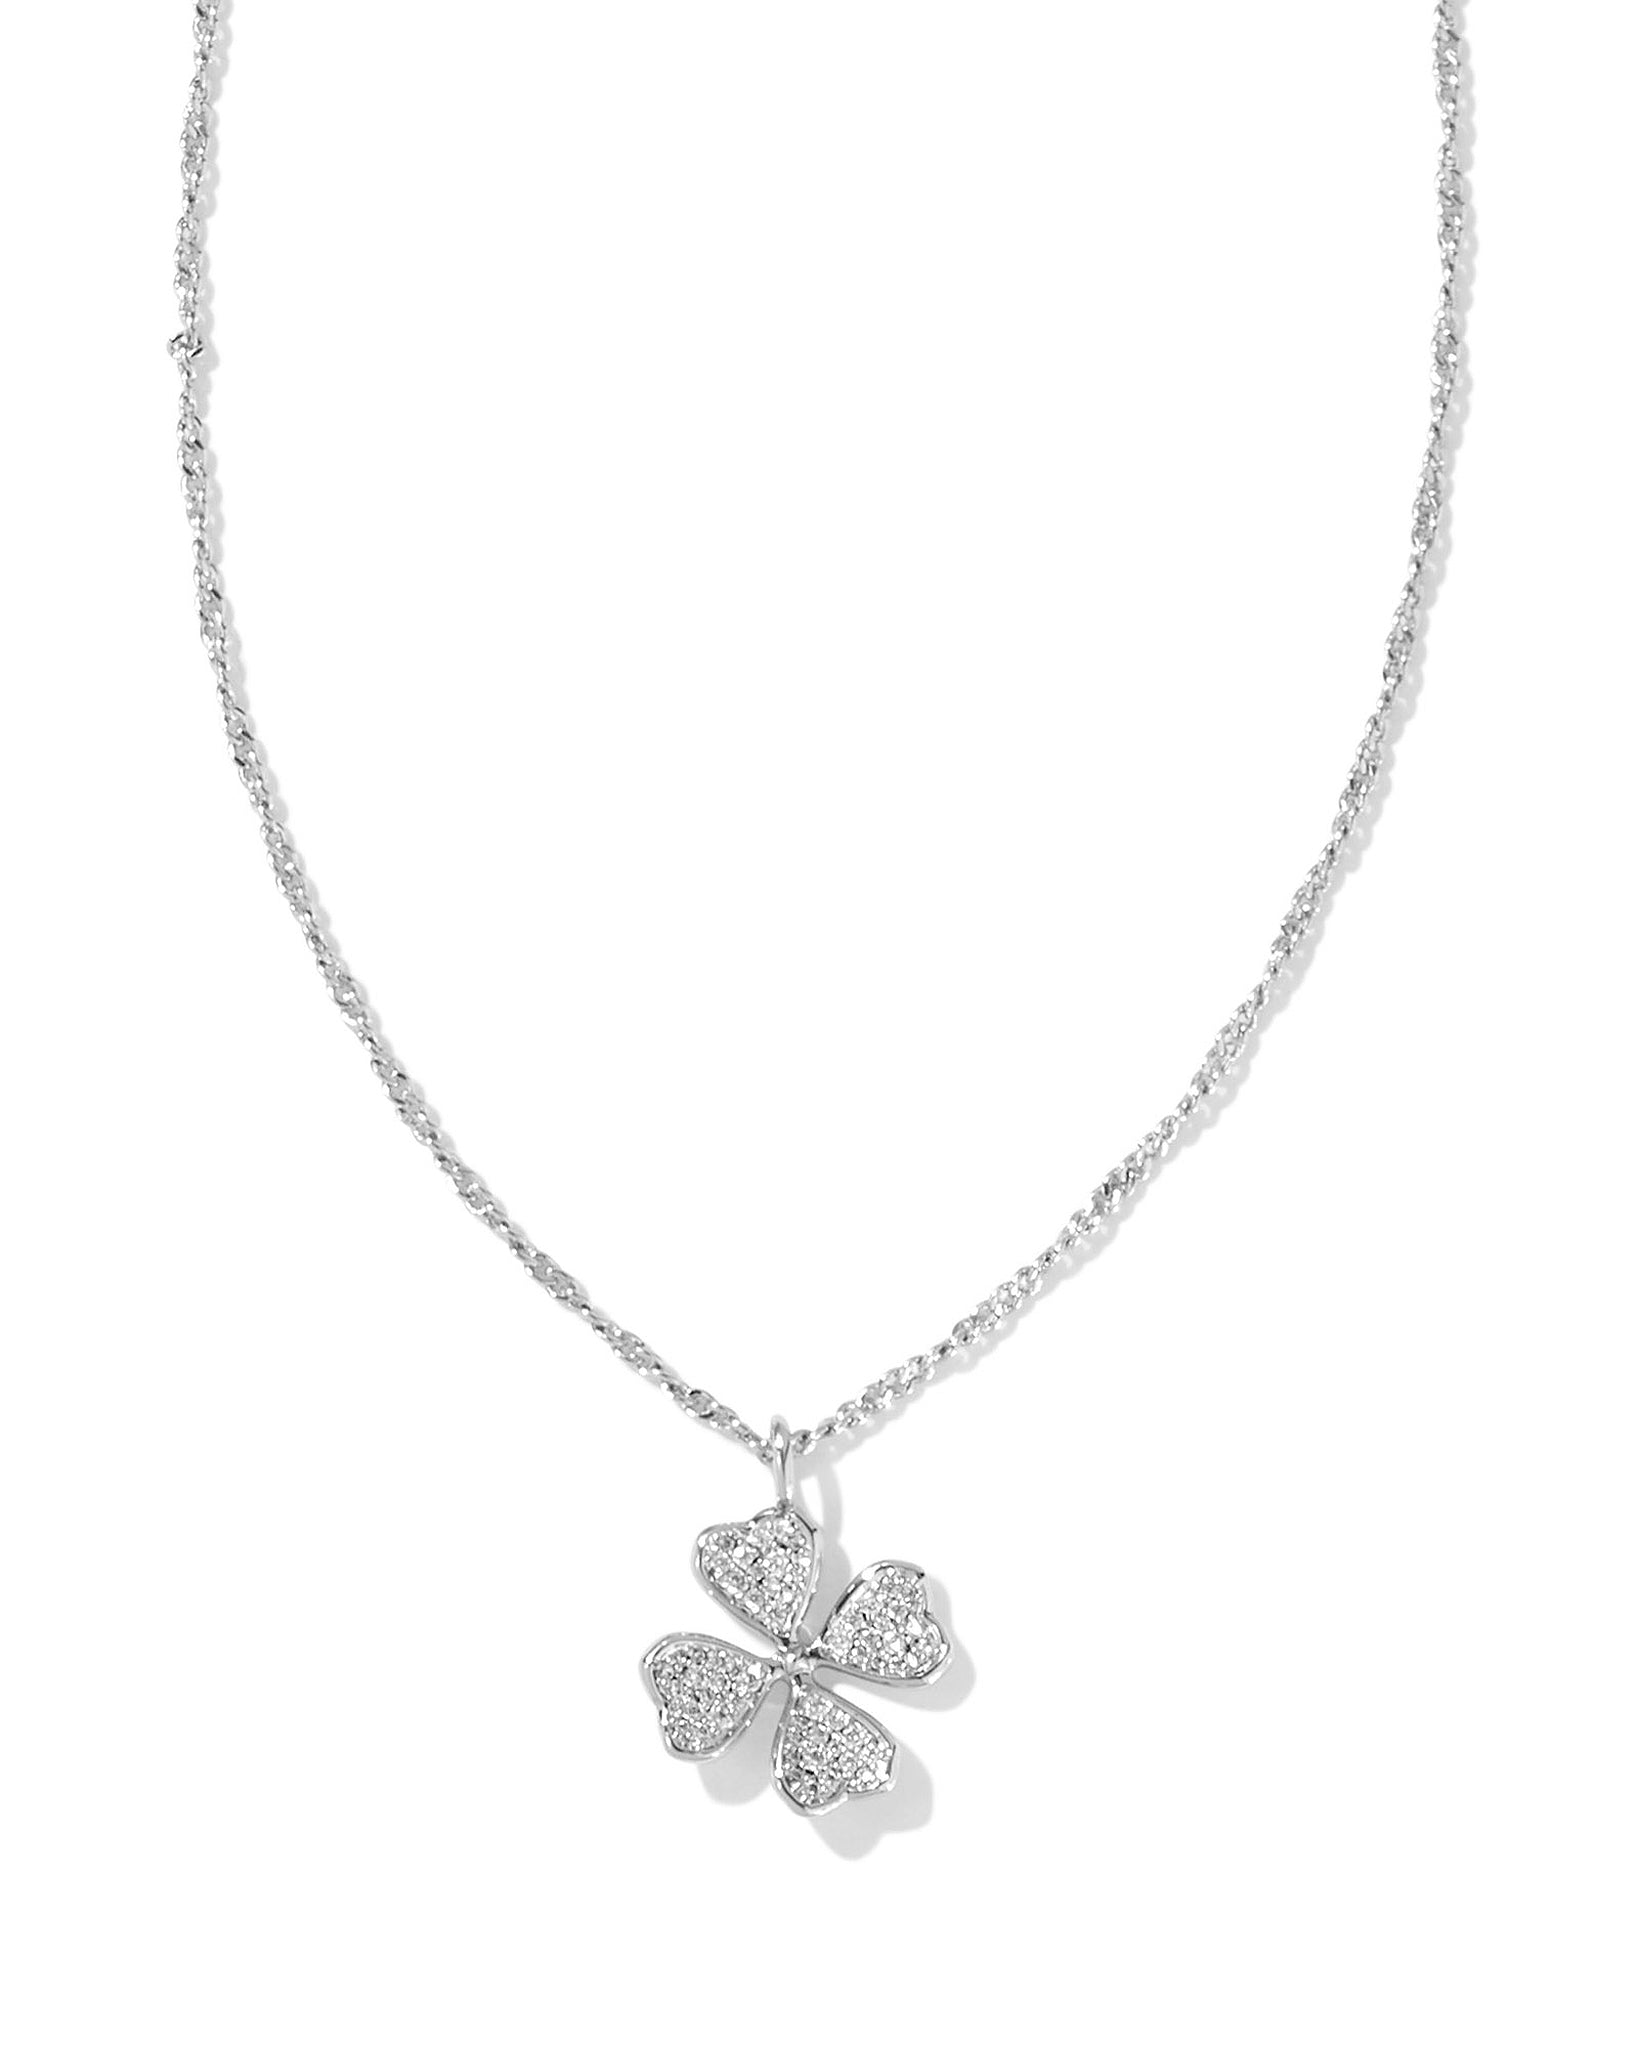 Kendra Scott Clover Pendant Necklace in White Crystal and Rhodium Plated